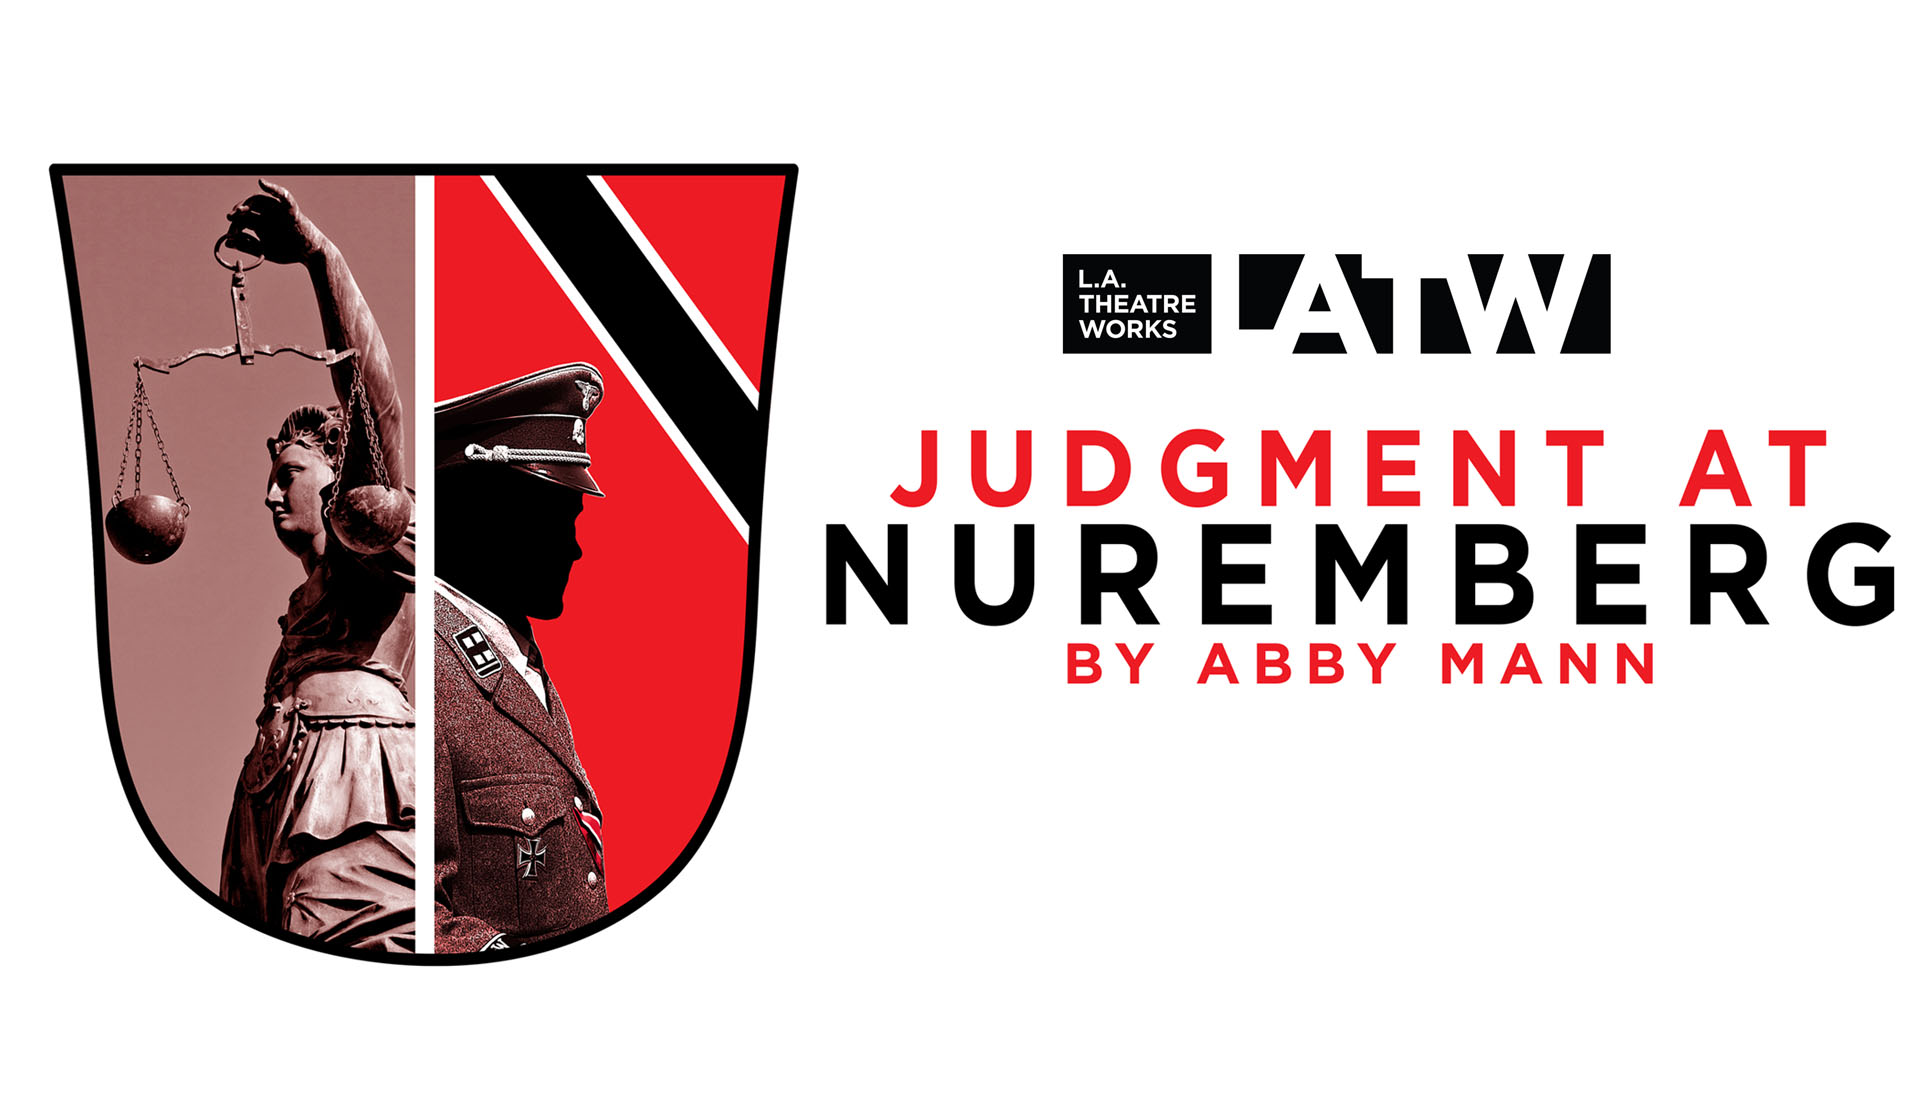 JUDGMENT AT NUREMBERG Williams Center for the Arts